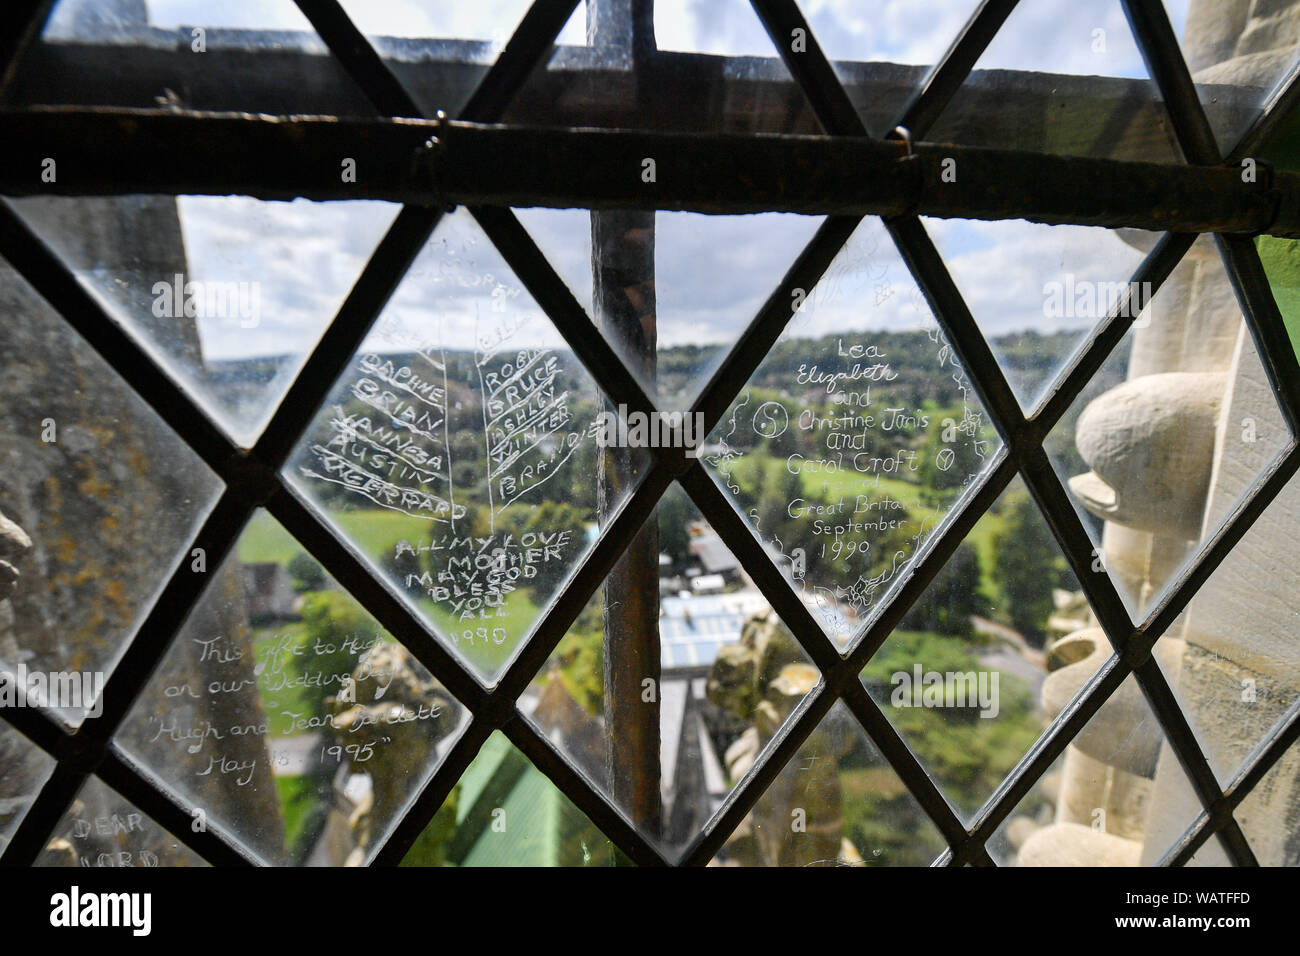 Messages engraved on leaded glass windows in Salisbury Cathedral tower, which were fitted as part of a fundraising drive in the 1990's can be seen during the Salisbury Cathedral Tower Tour, where visitors are guided up to the base of the 123 metre tall spire, climbing 332 mainly spiral steps, through the vaulted roof space, past medieval stained glass and through the inner workings of the 13th century cathedral. Stock Photo